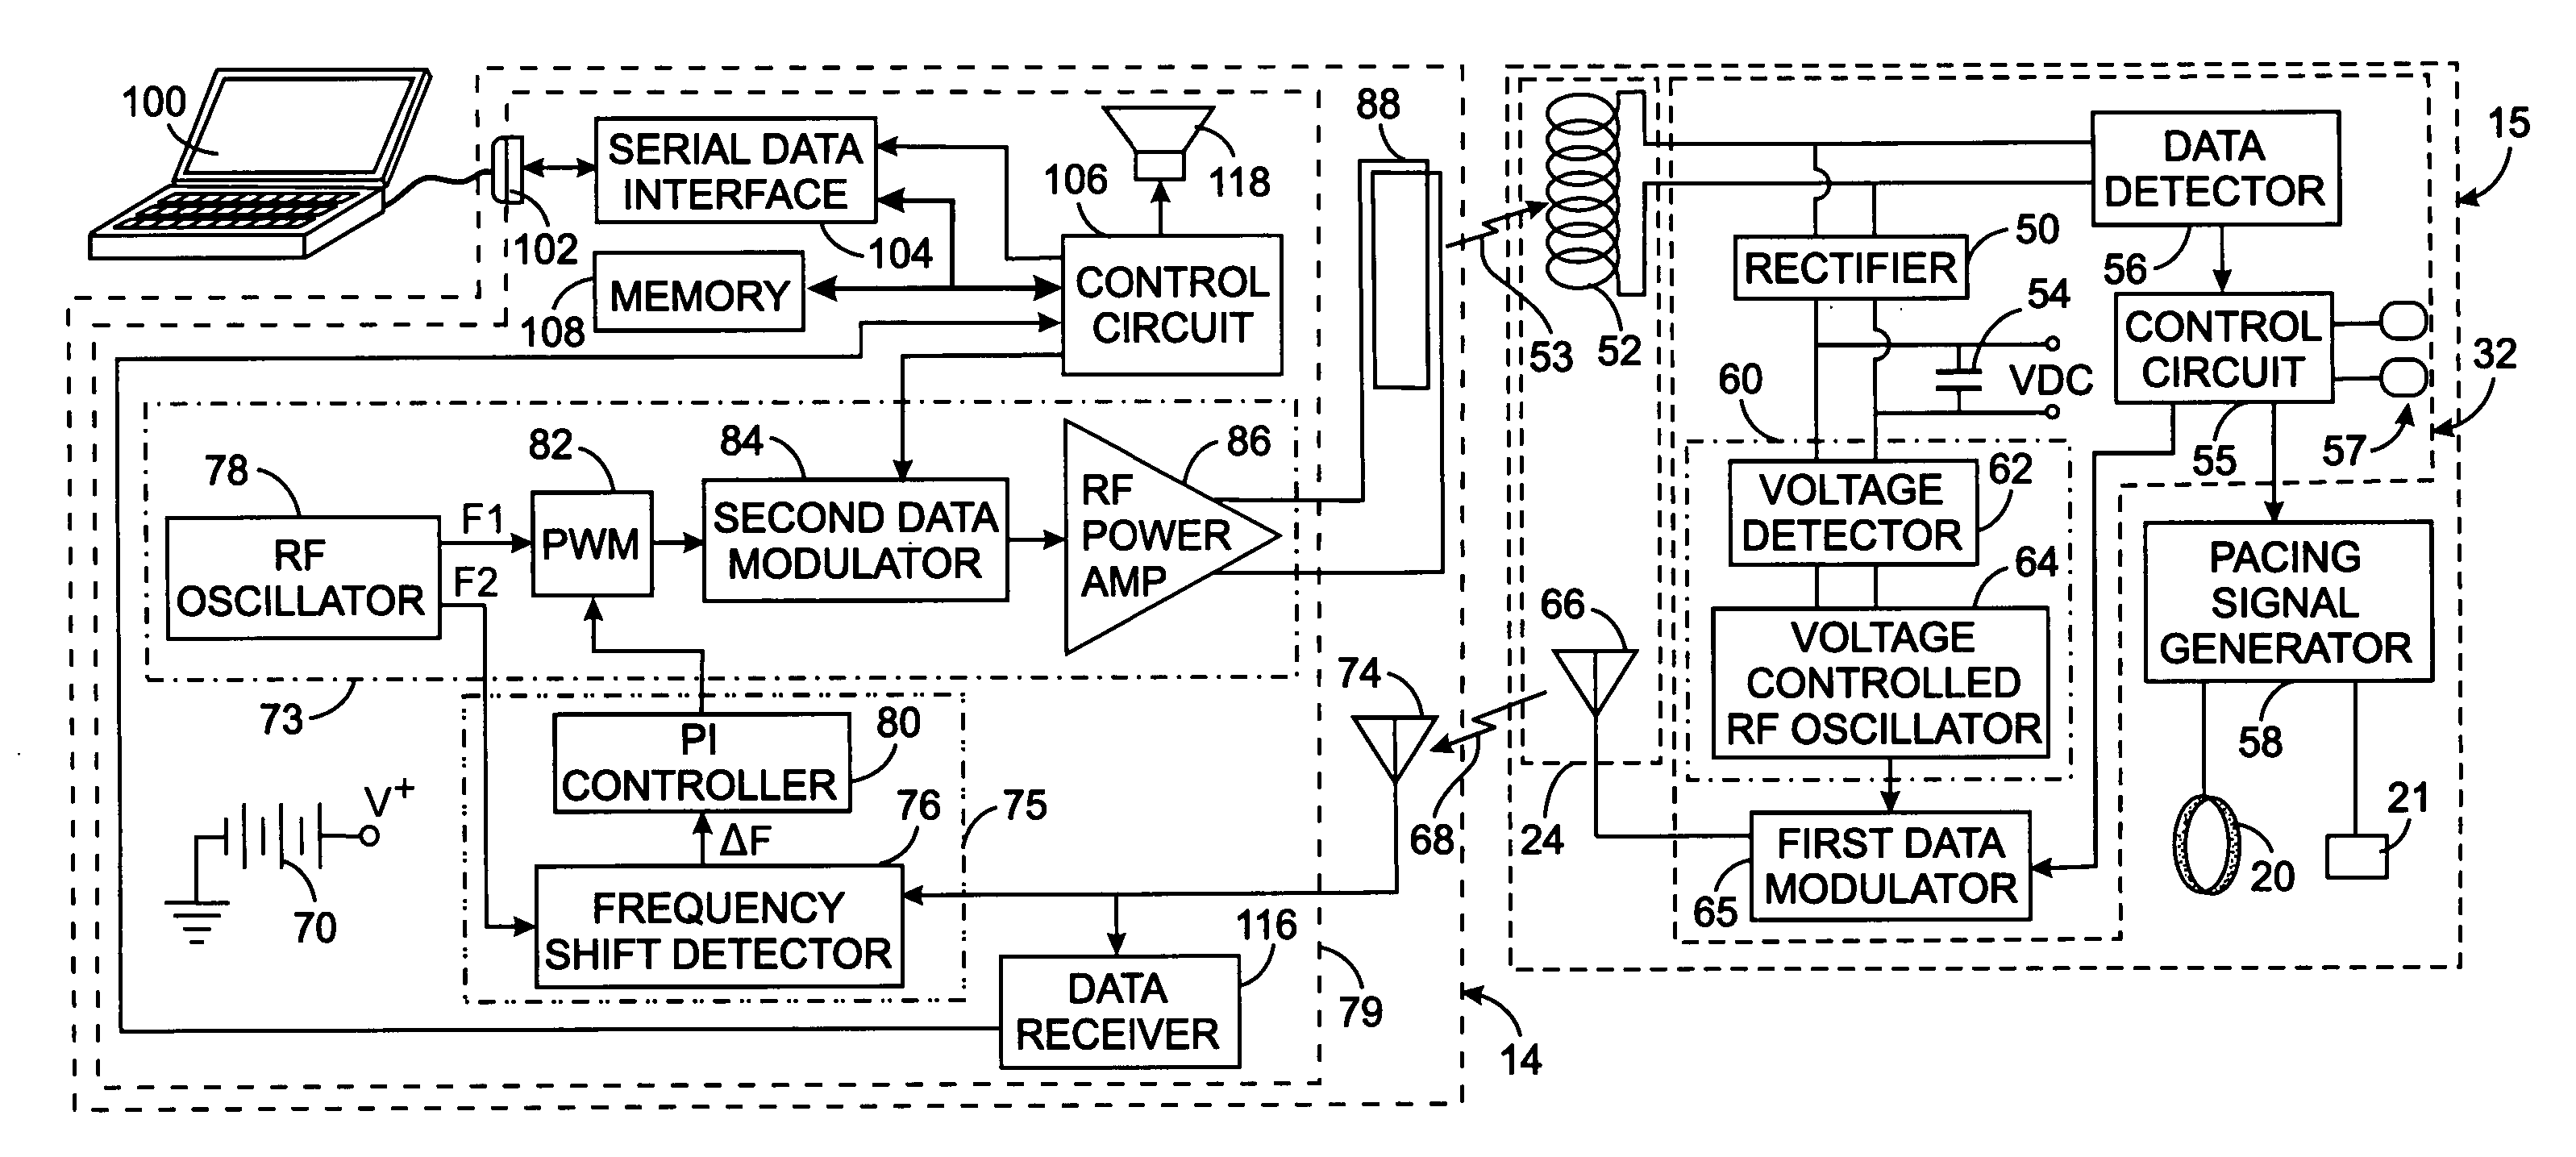 Extracorporeal power supply with a wireless feedback system for an implanted medical device